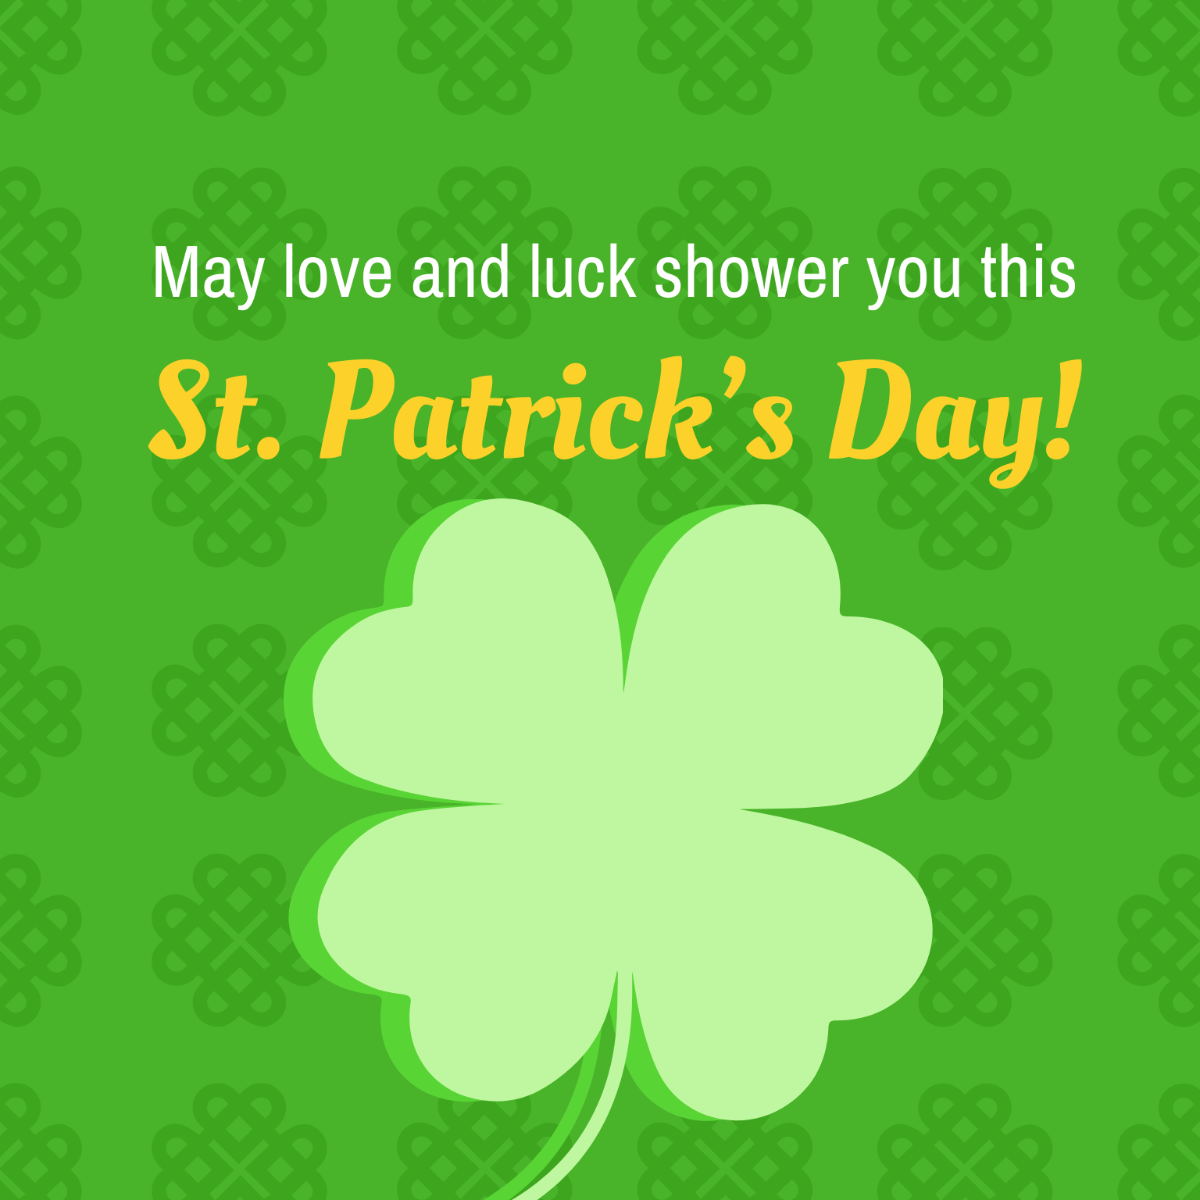 St. Patrick's Day Wishes Vector Template